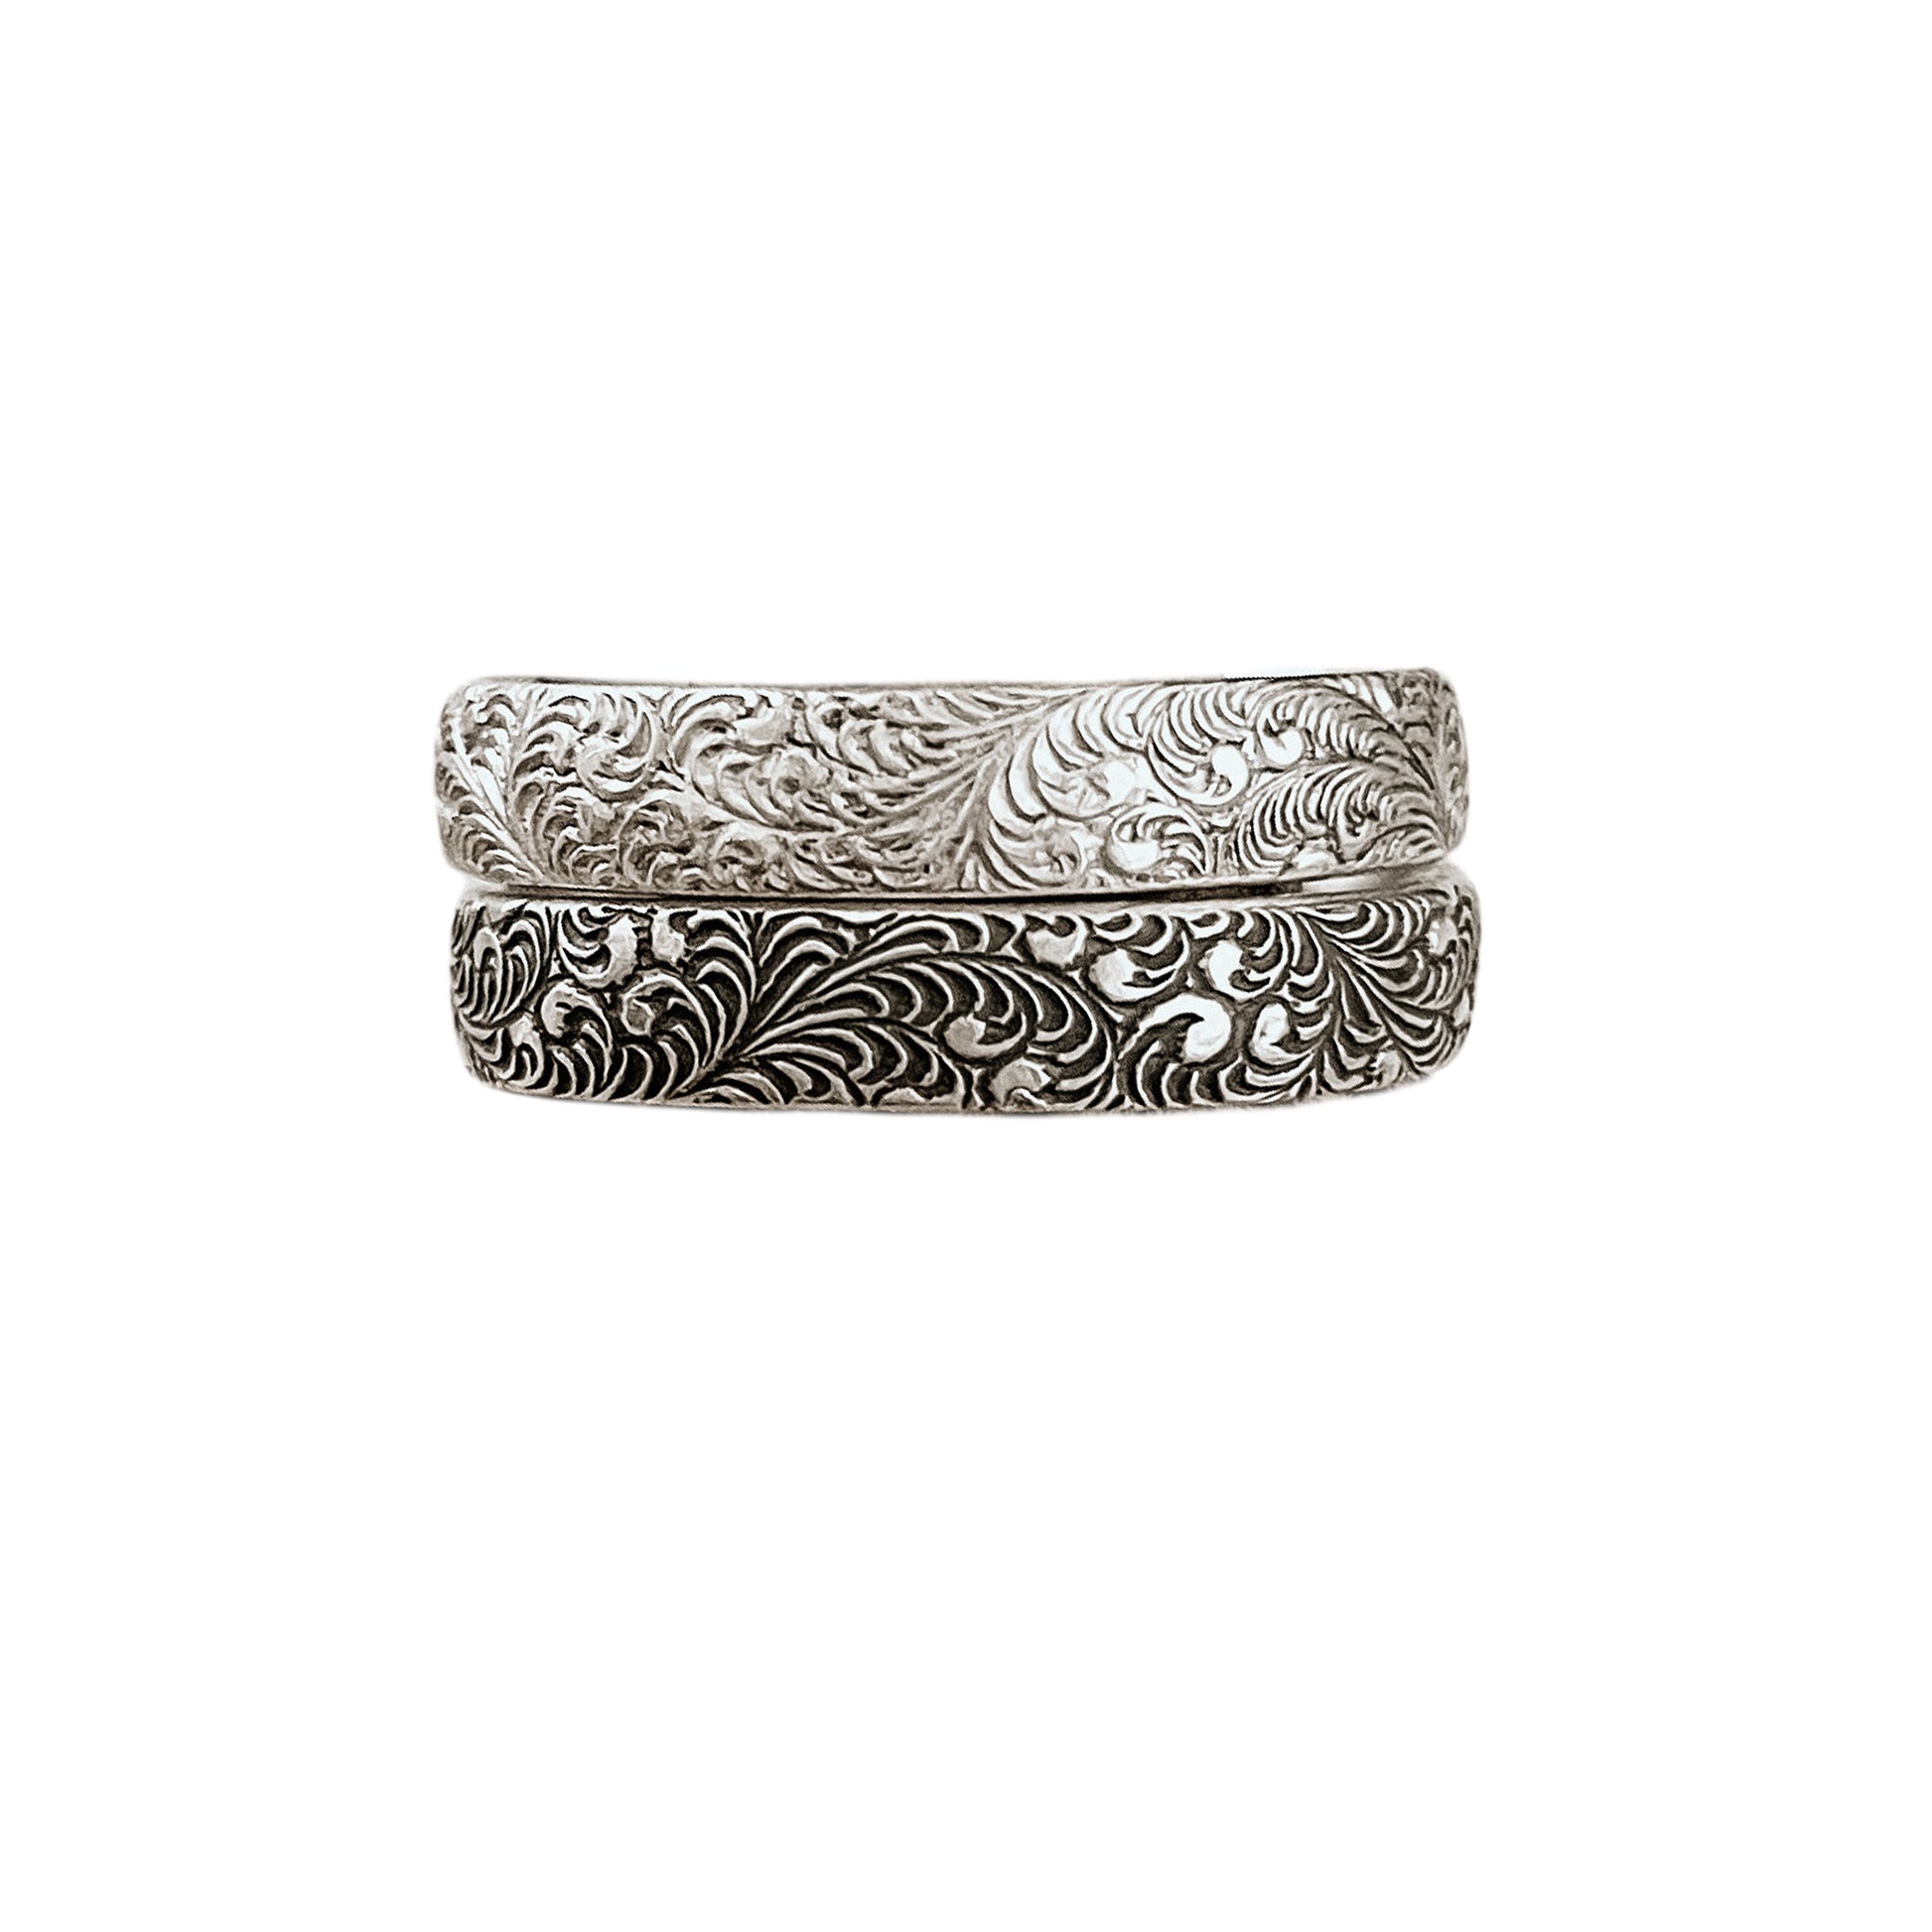 Feathered Sterling Silver Stacking Rings featuring burlesque style feather pattern shown in bright (top) & antiqued (bottom) sterling silver finishes.